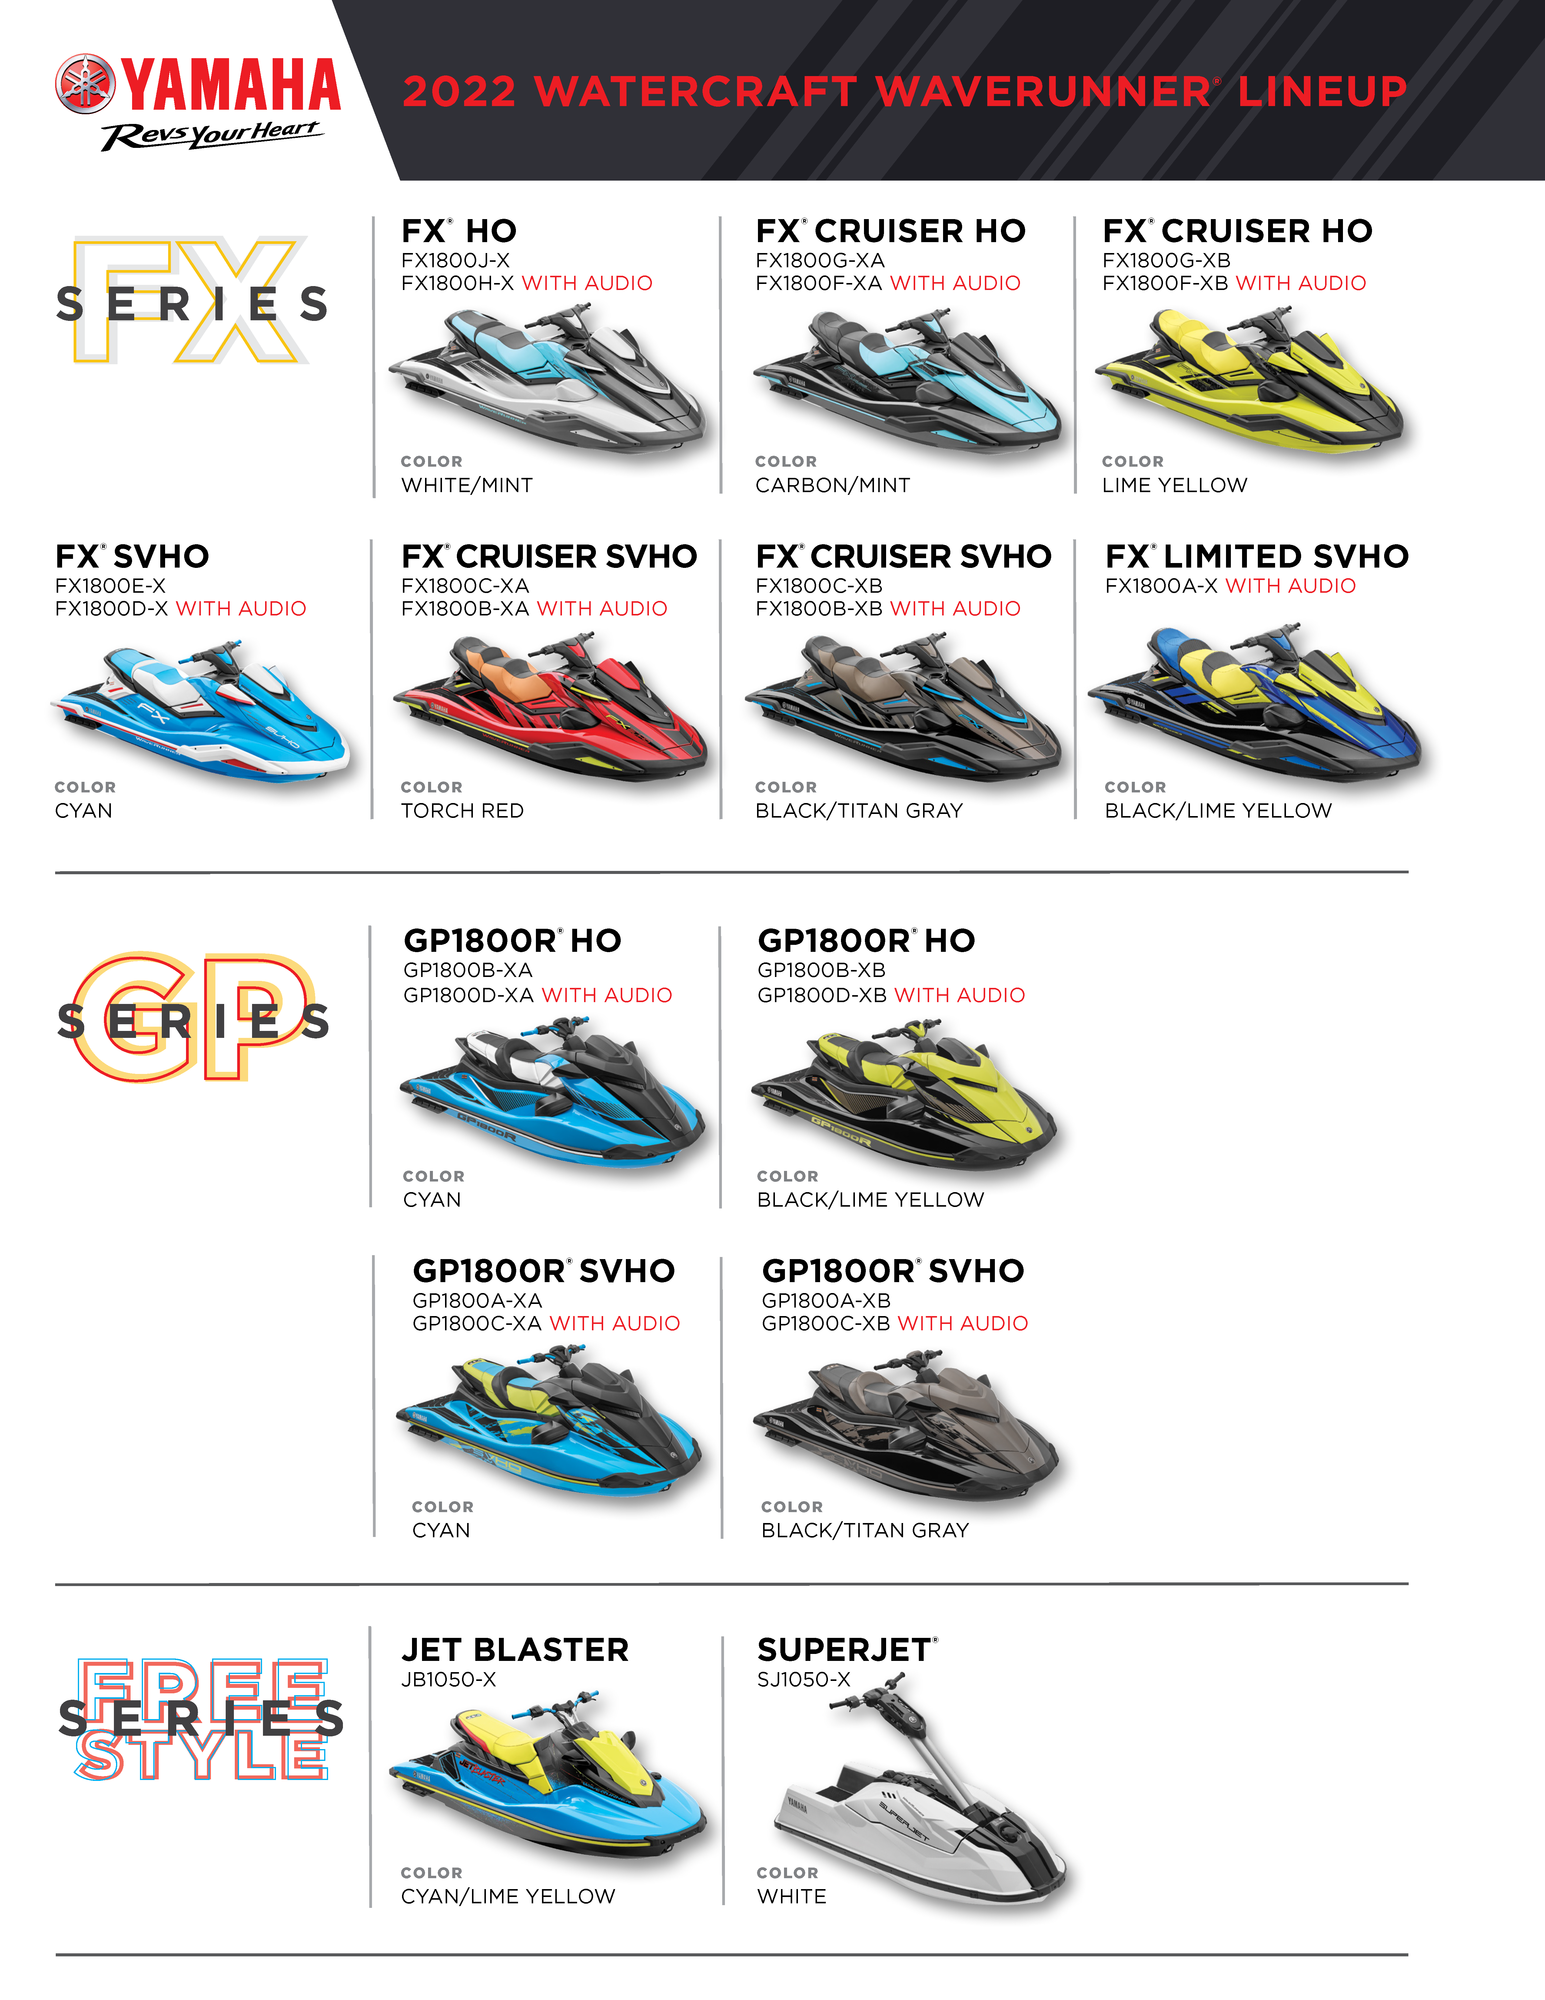 2022 WaveRunners - FX and GP Series